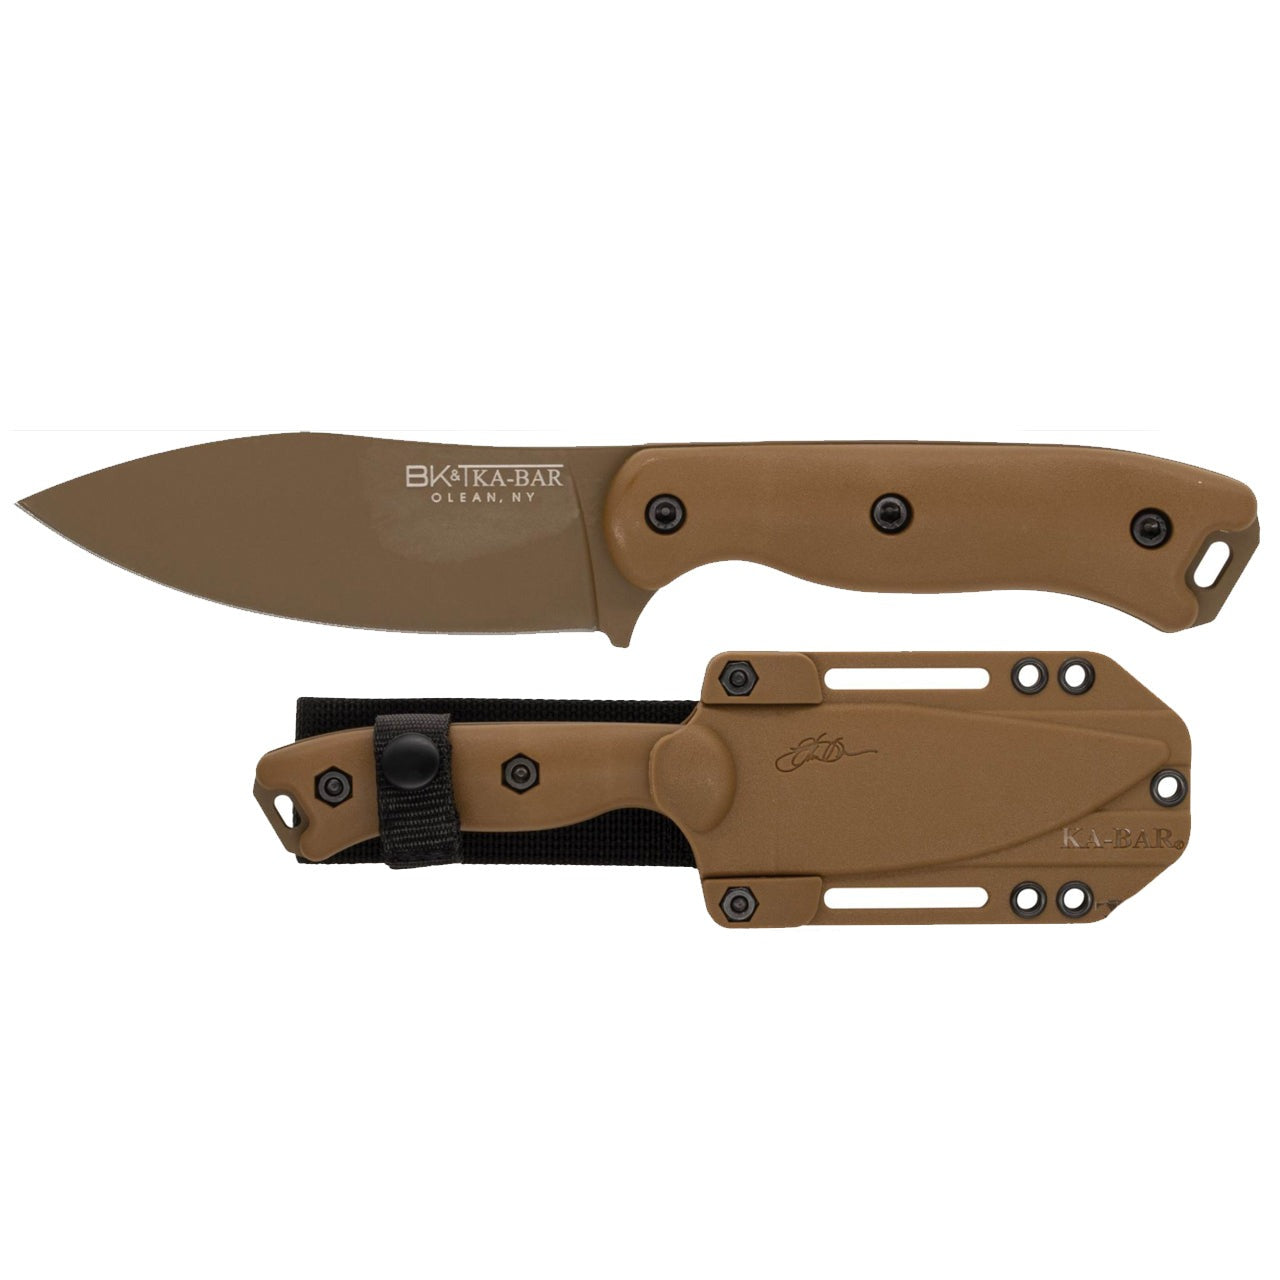 The BK19 Becker Nessmuk is the newest fixed blade in KA-BAR’s popular Becker Knife & Tool line.  Designed by Ethan Becker, the BK19 shares select traits with the highly sought after Becker BK18 Harpoon, such as handle scales, Celcon® sheath, and burnt bronze color. The BK19 stands out with its Nessmuk blade shape, a fan favorite in the bushcraft community. www.moralepatches.com.au